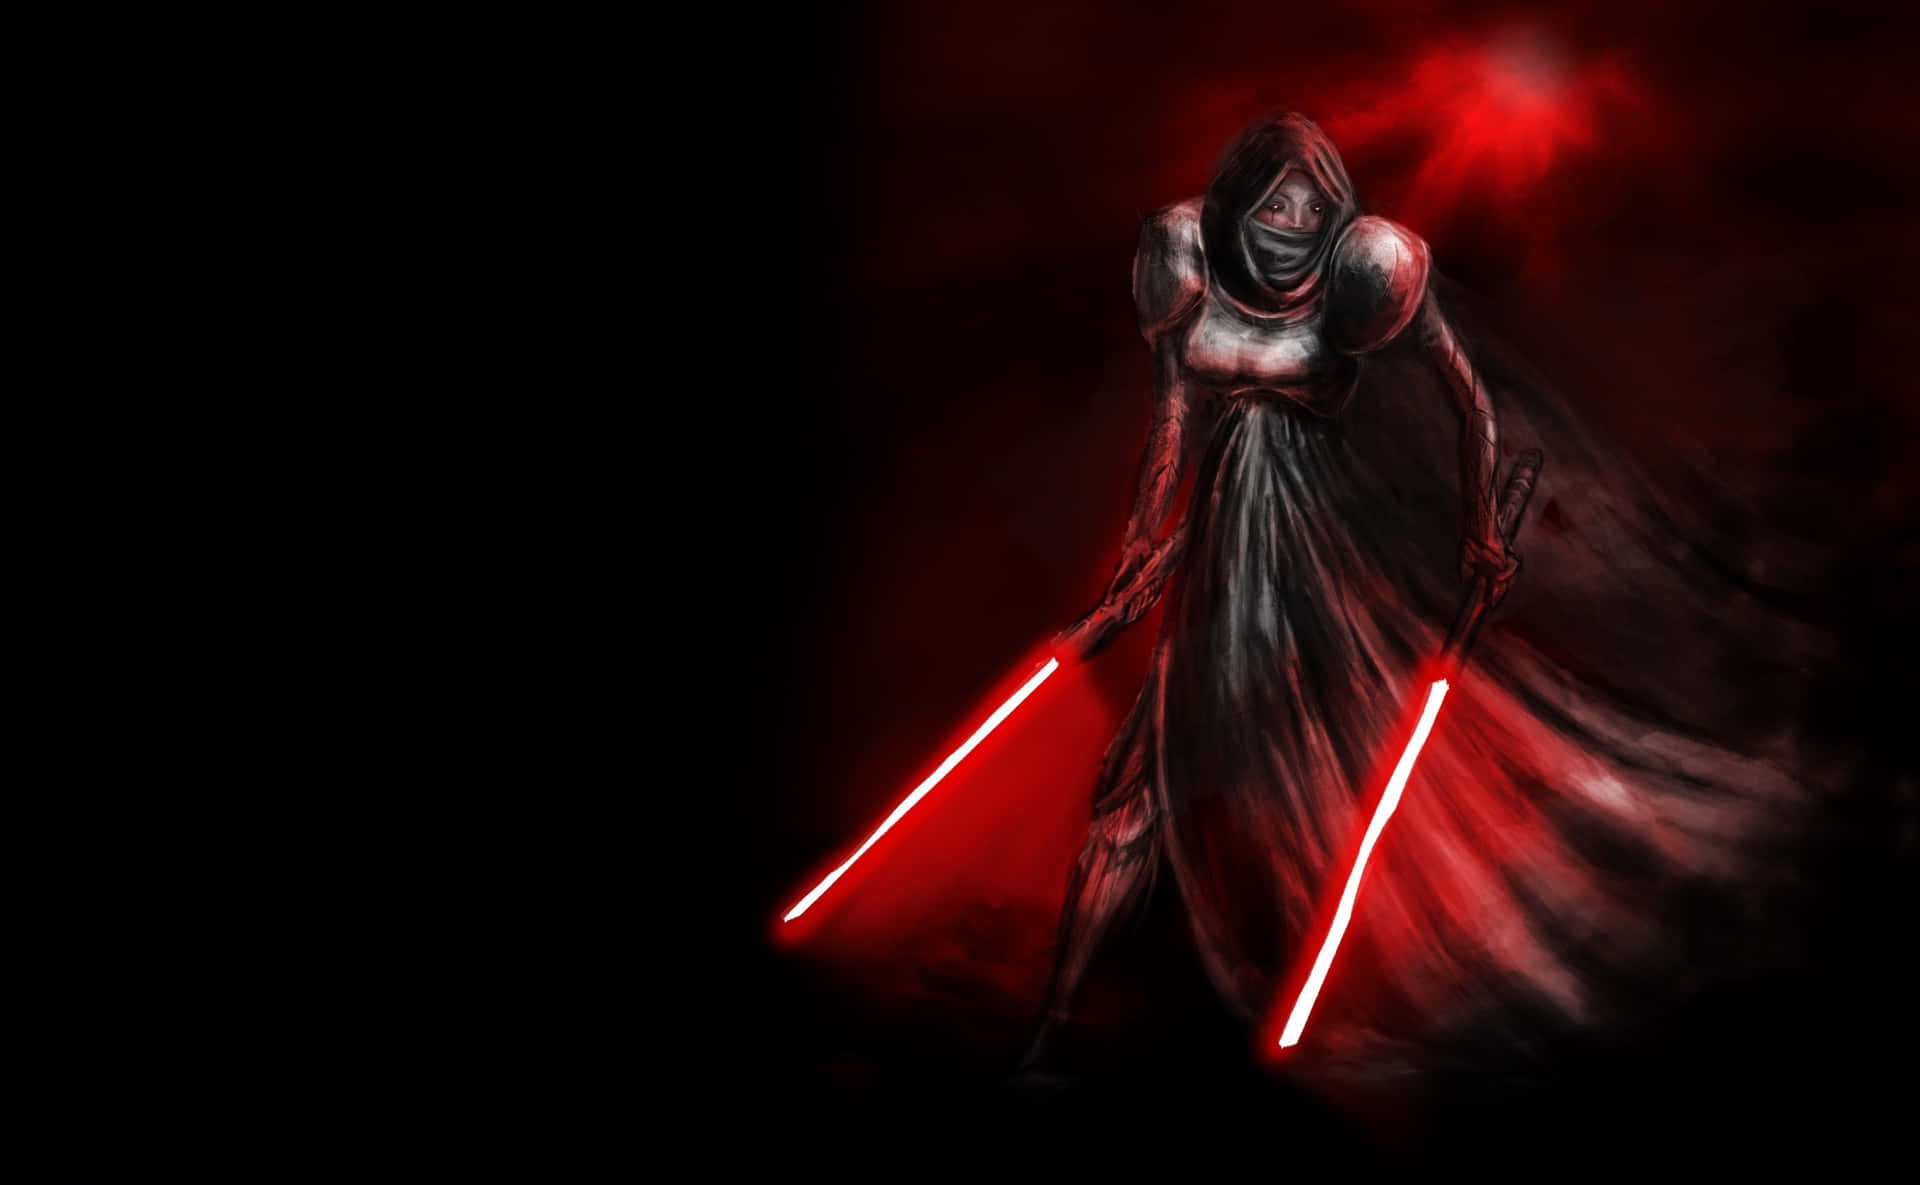 "Master Your Force with a Star Wars Lightsaber" Wallpaper